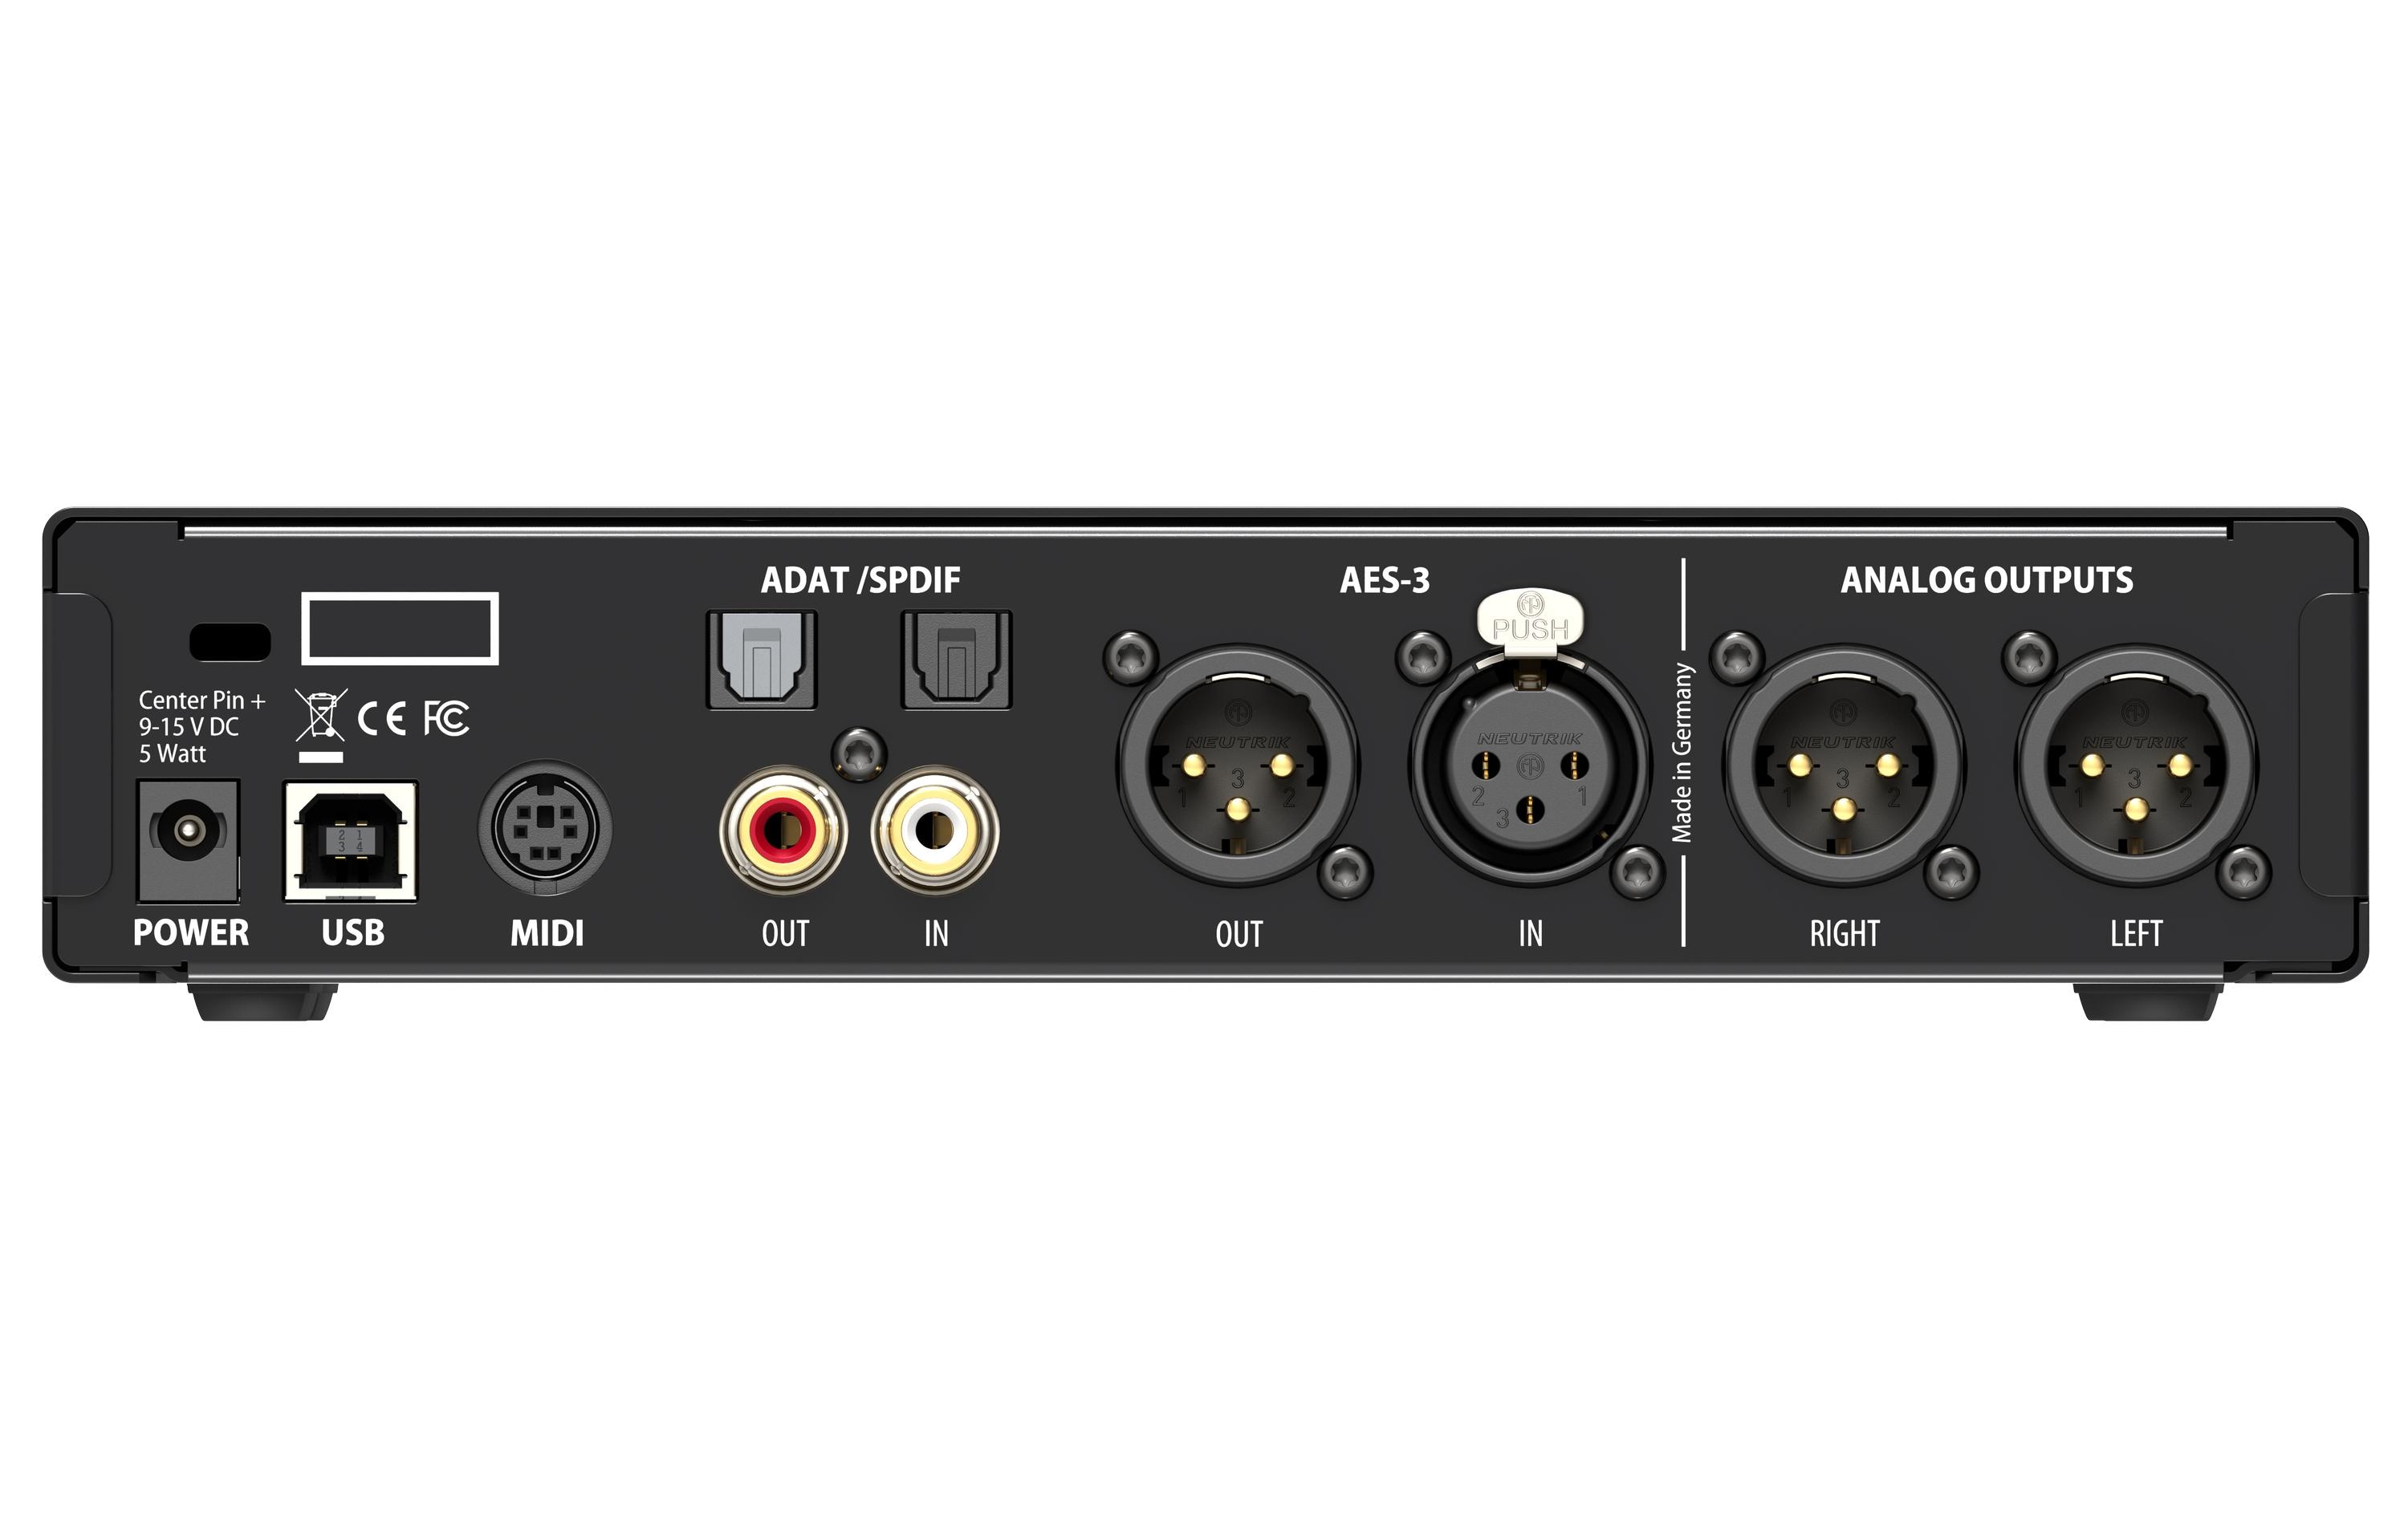 RME Audio Interface Digiface AES